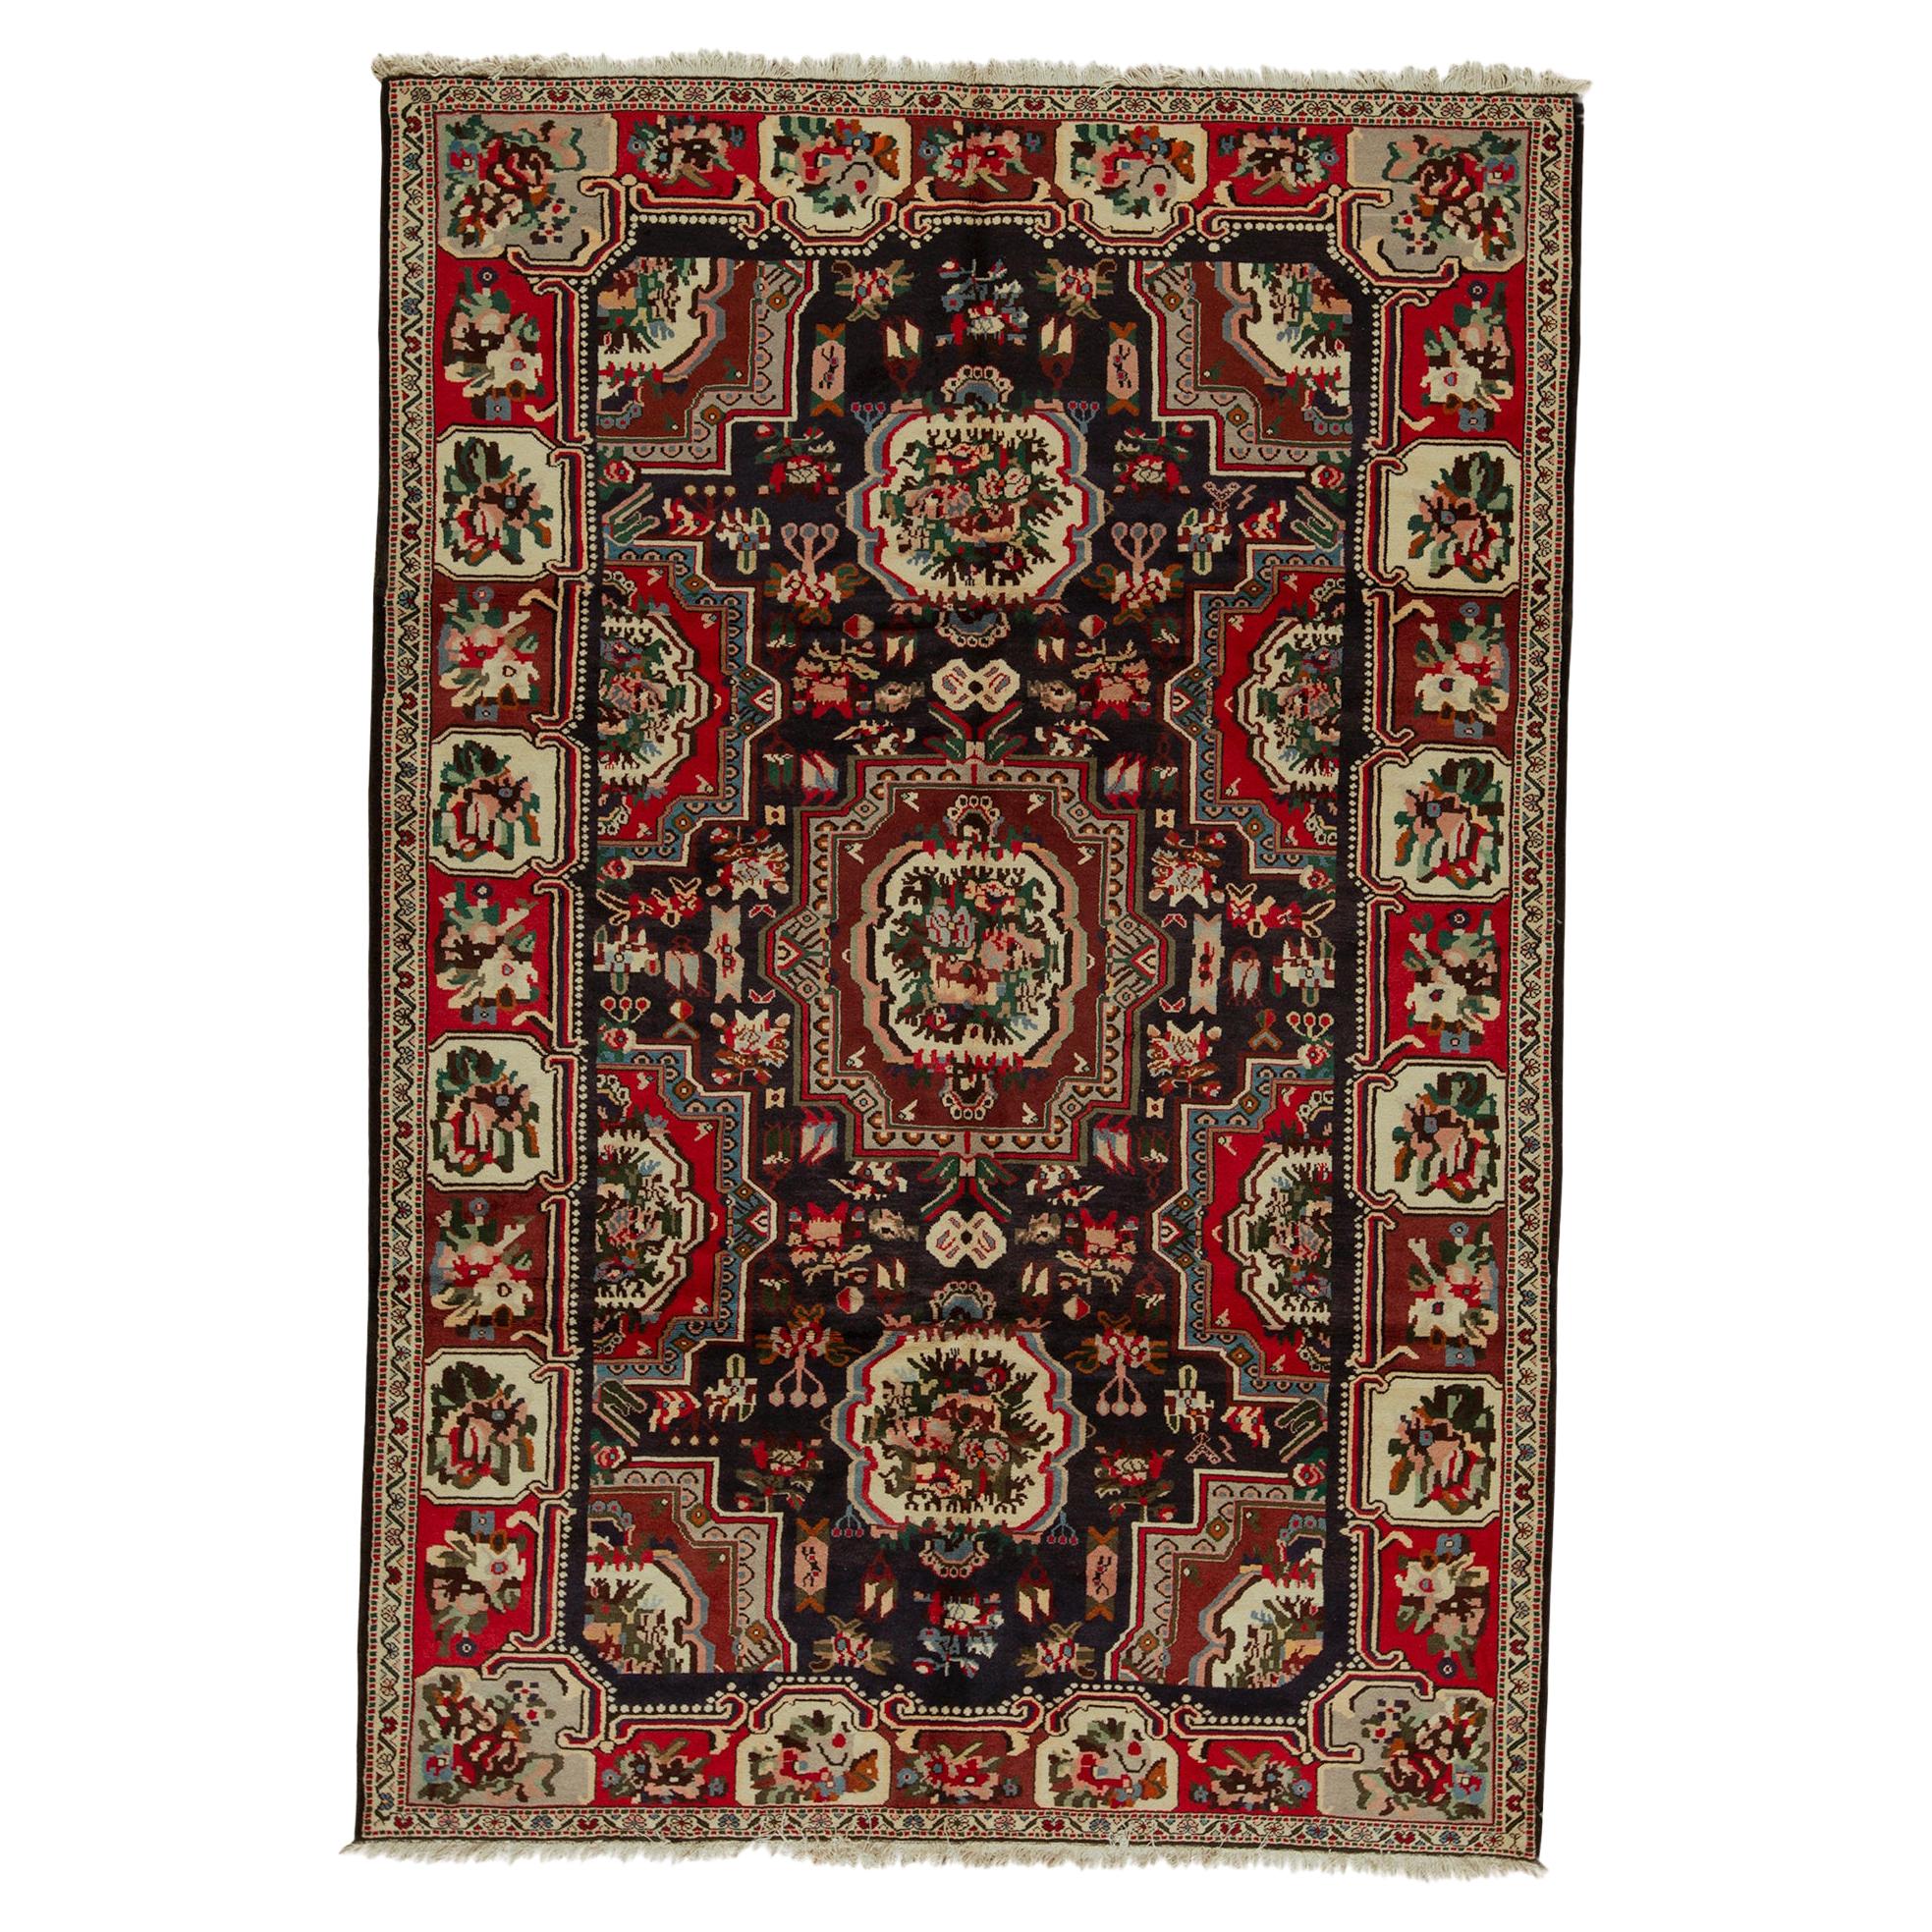  Antique Persian fine Traditional Handwoven Luxury Wool Black / Red Rug